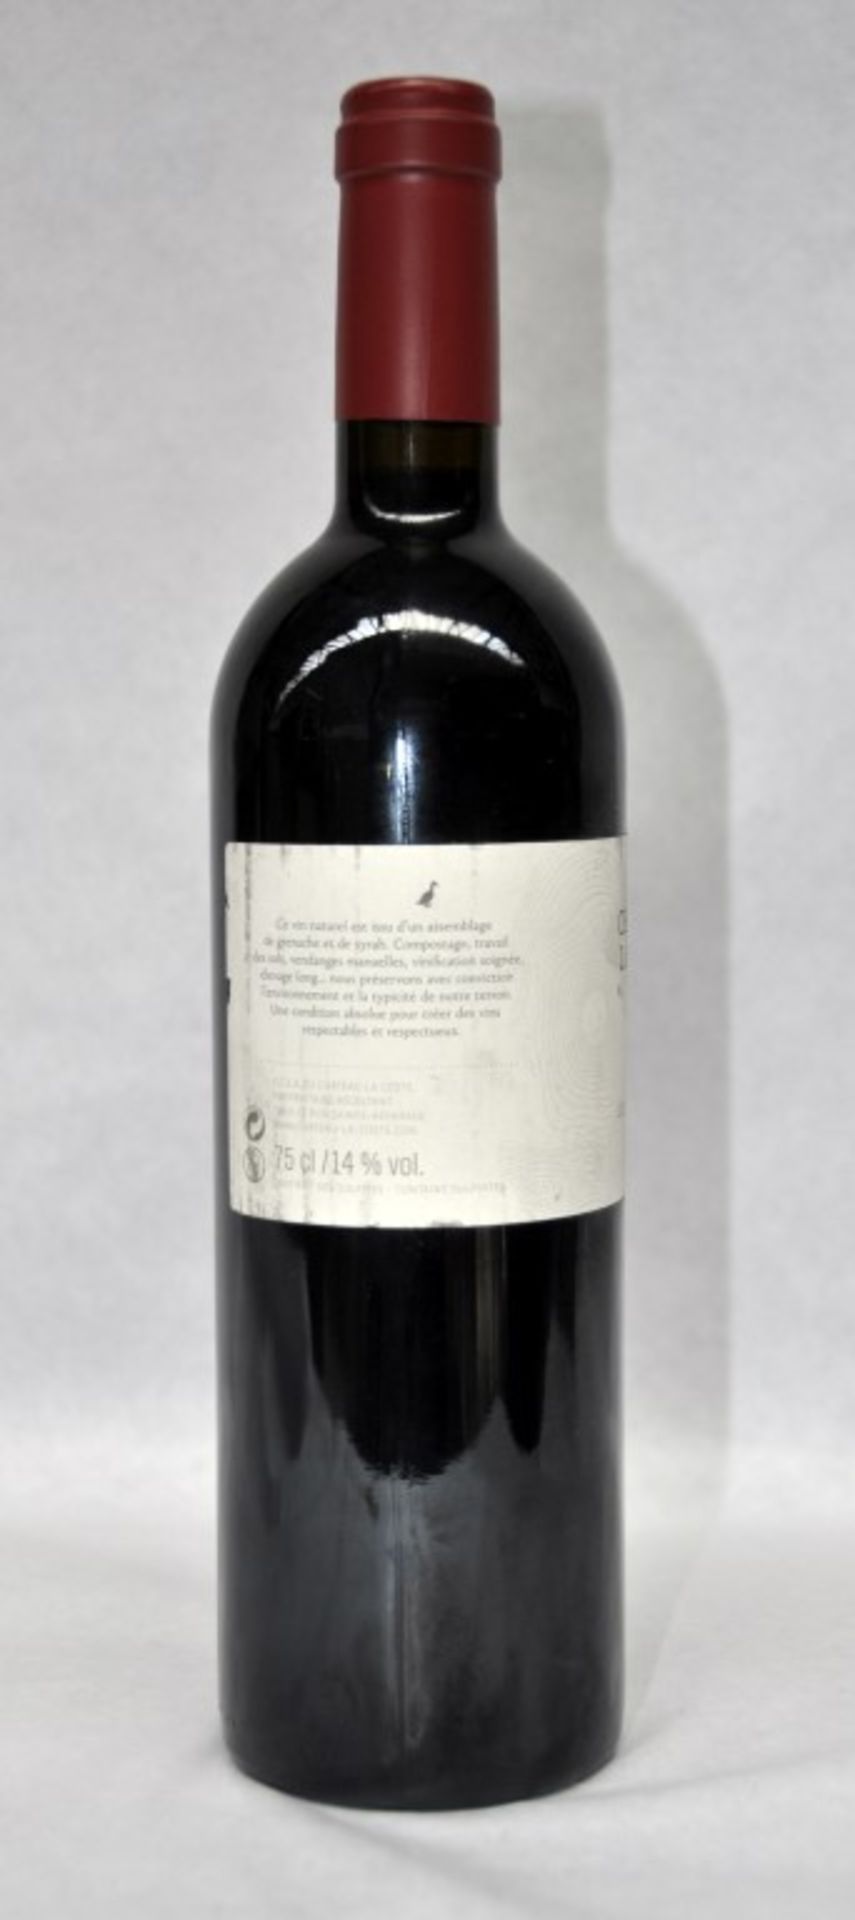 1 x Chateau La Coste Les Pentes Douces Red Wine - French Wine - 2007 - Bottle Size 75cl - Volume 14% - Image 3 of 3